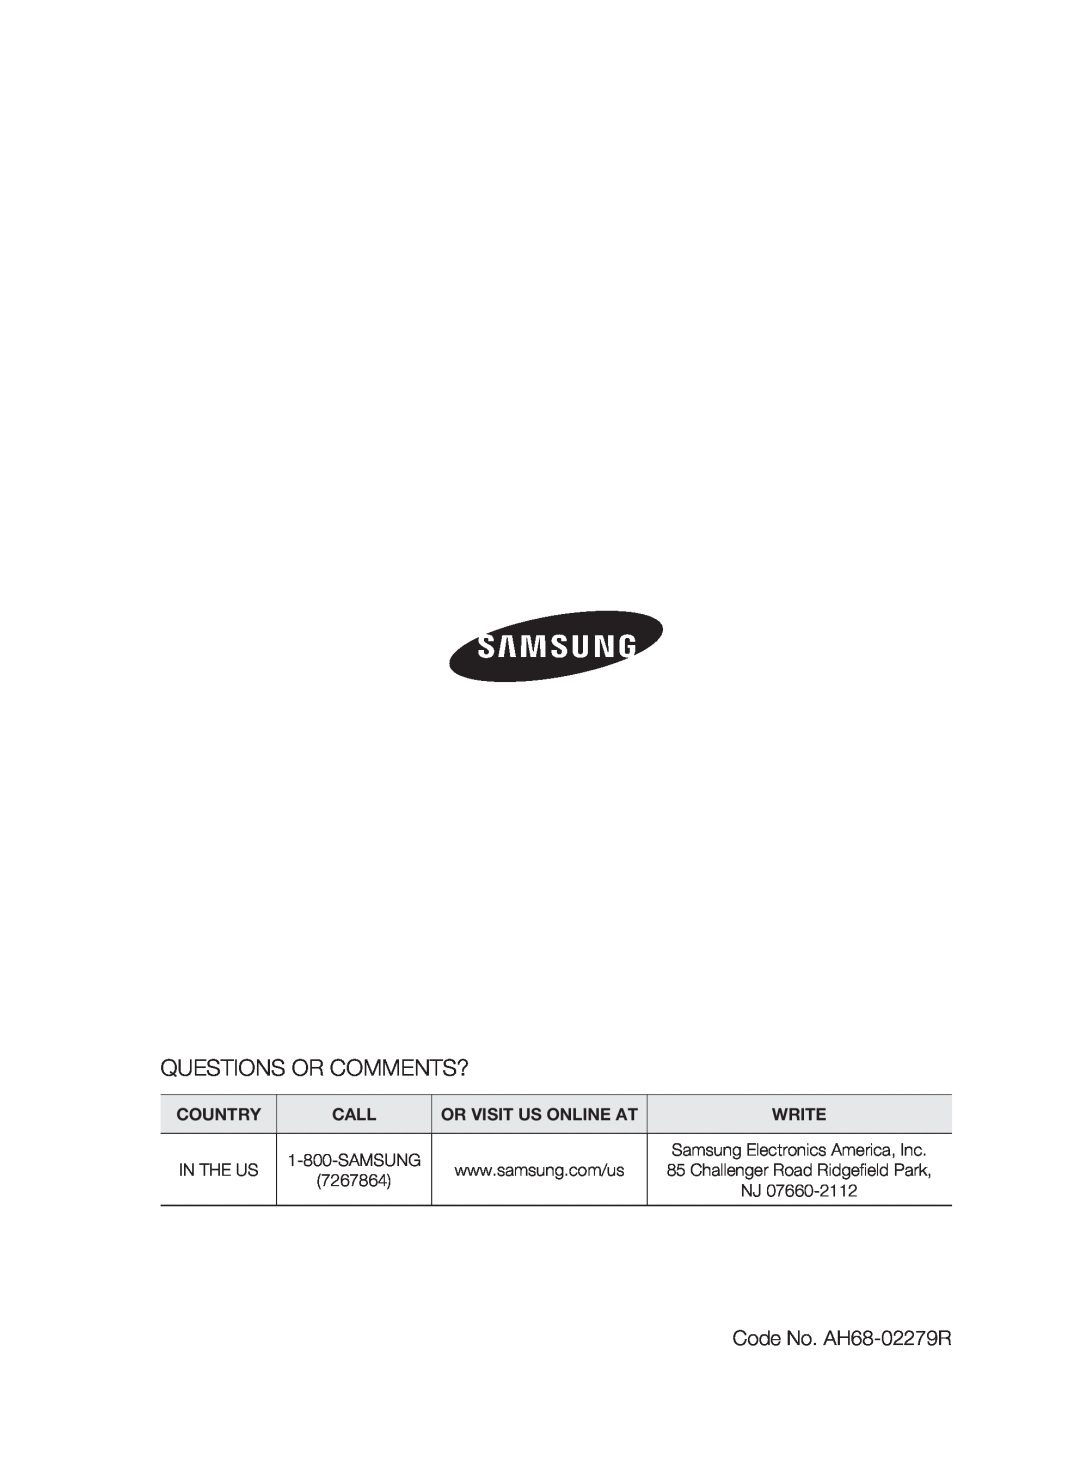 Samsung HT-C6900W user manual Questions Or Comments?, Code No. AH68-02279R, Country, Call, Or Visit Us Online At, Write 